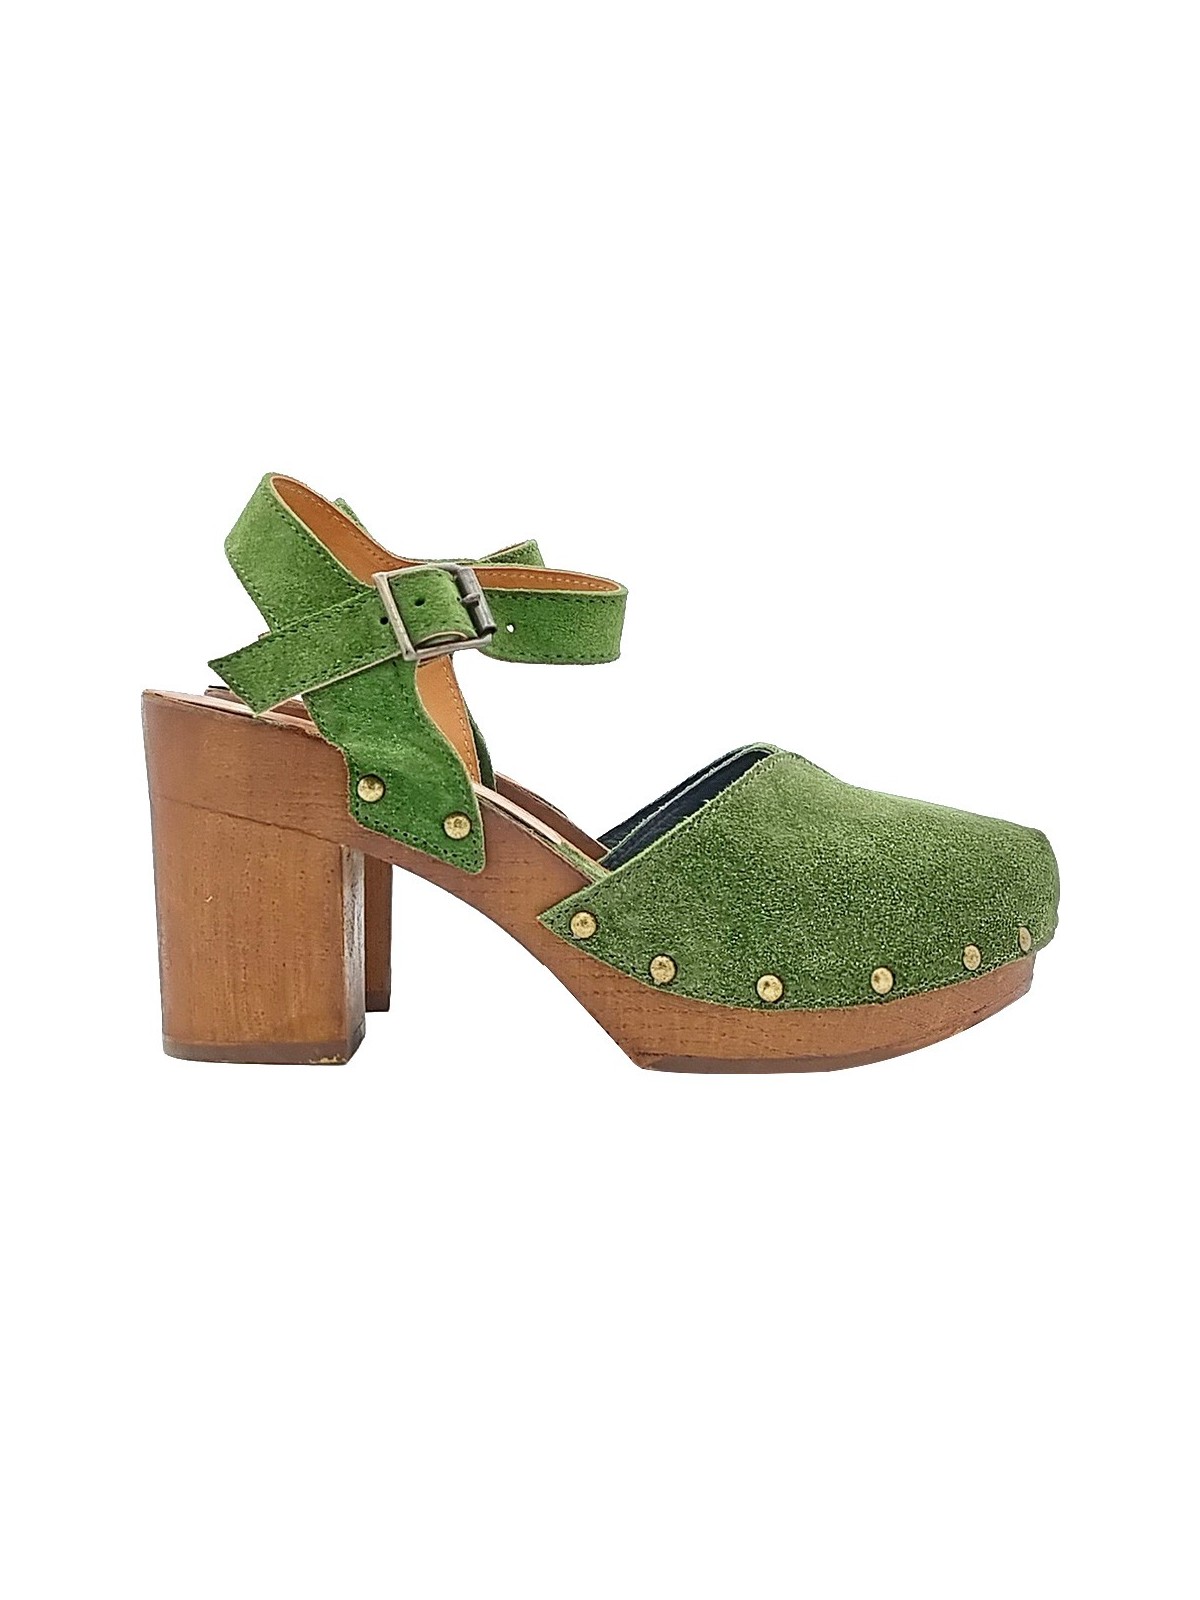 SWEDISH SANDALS IN GREEN SUEDE